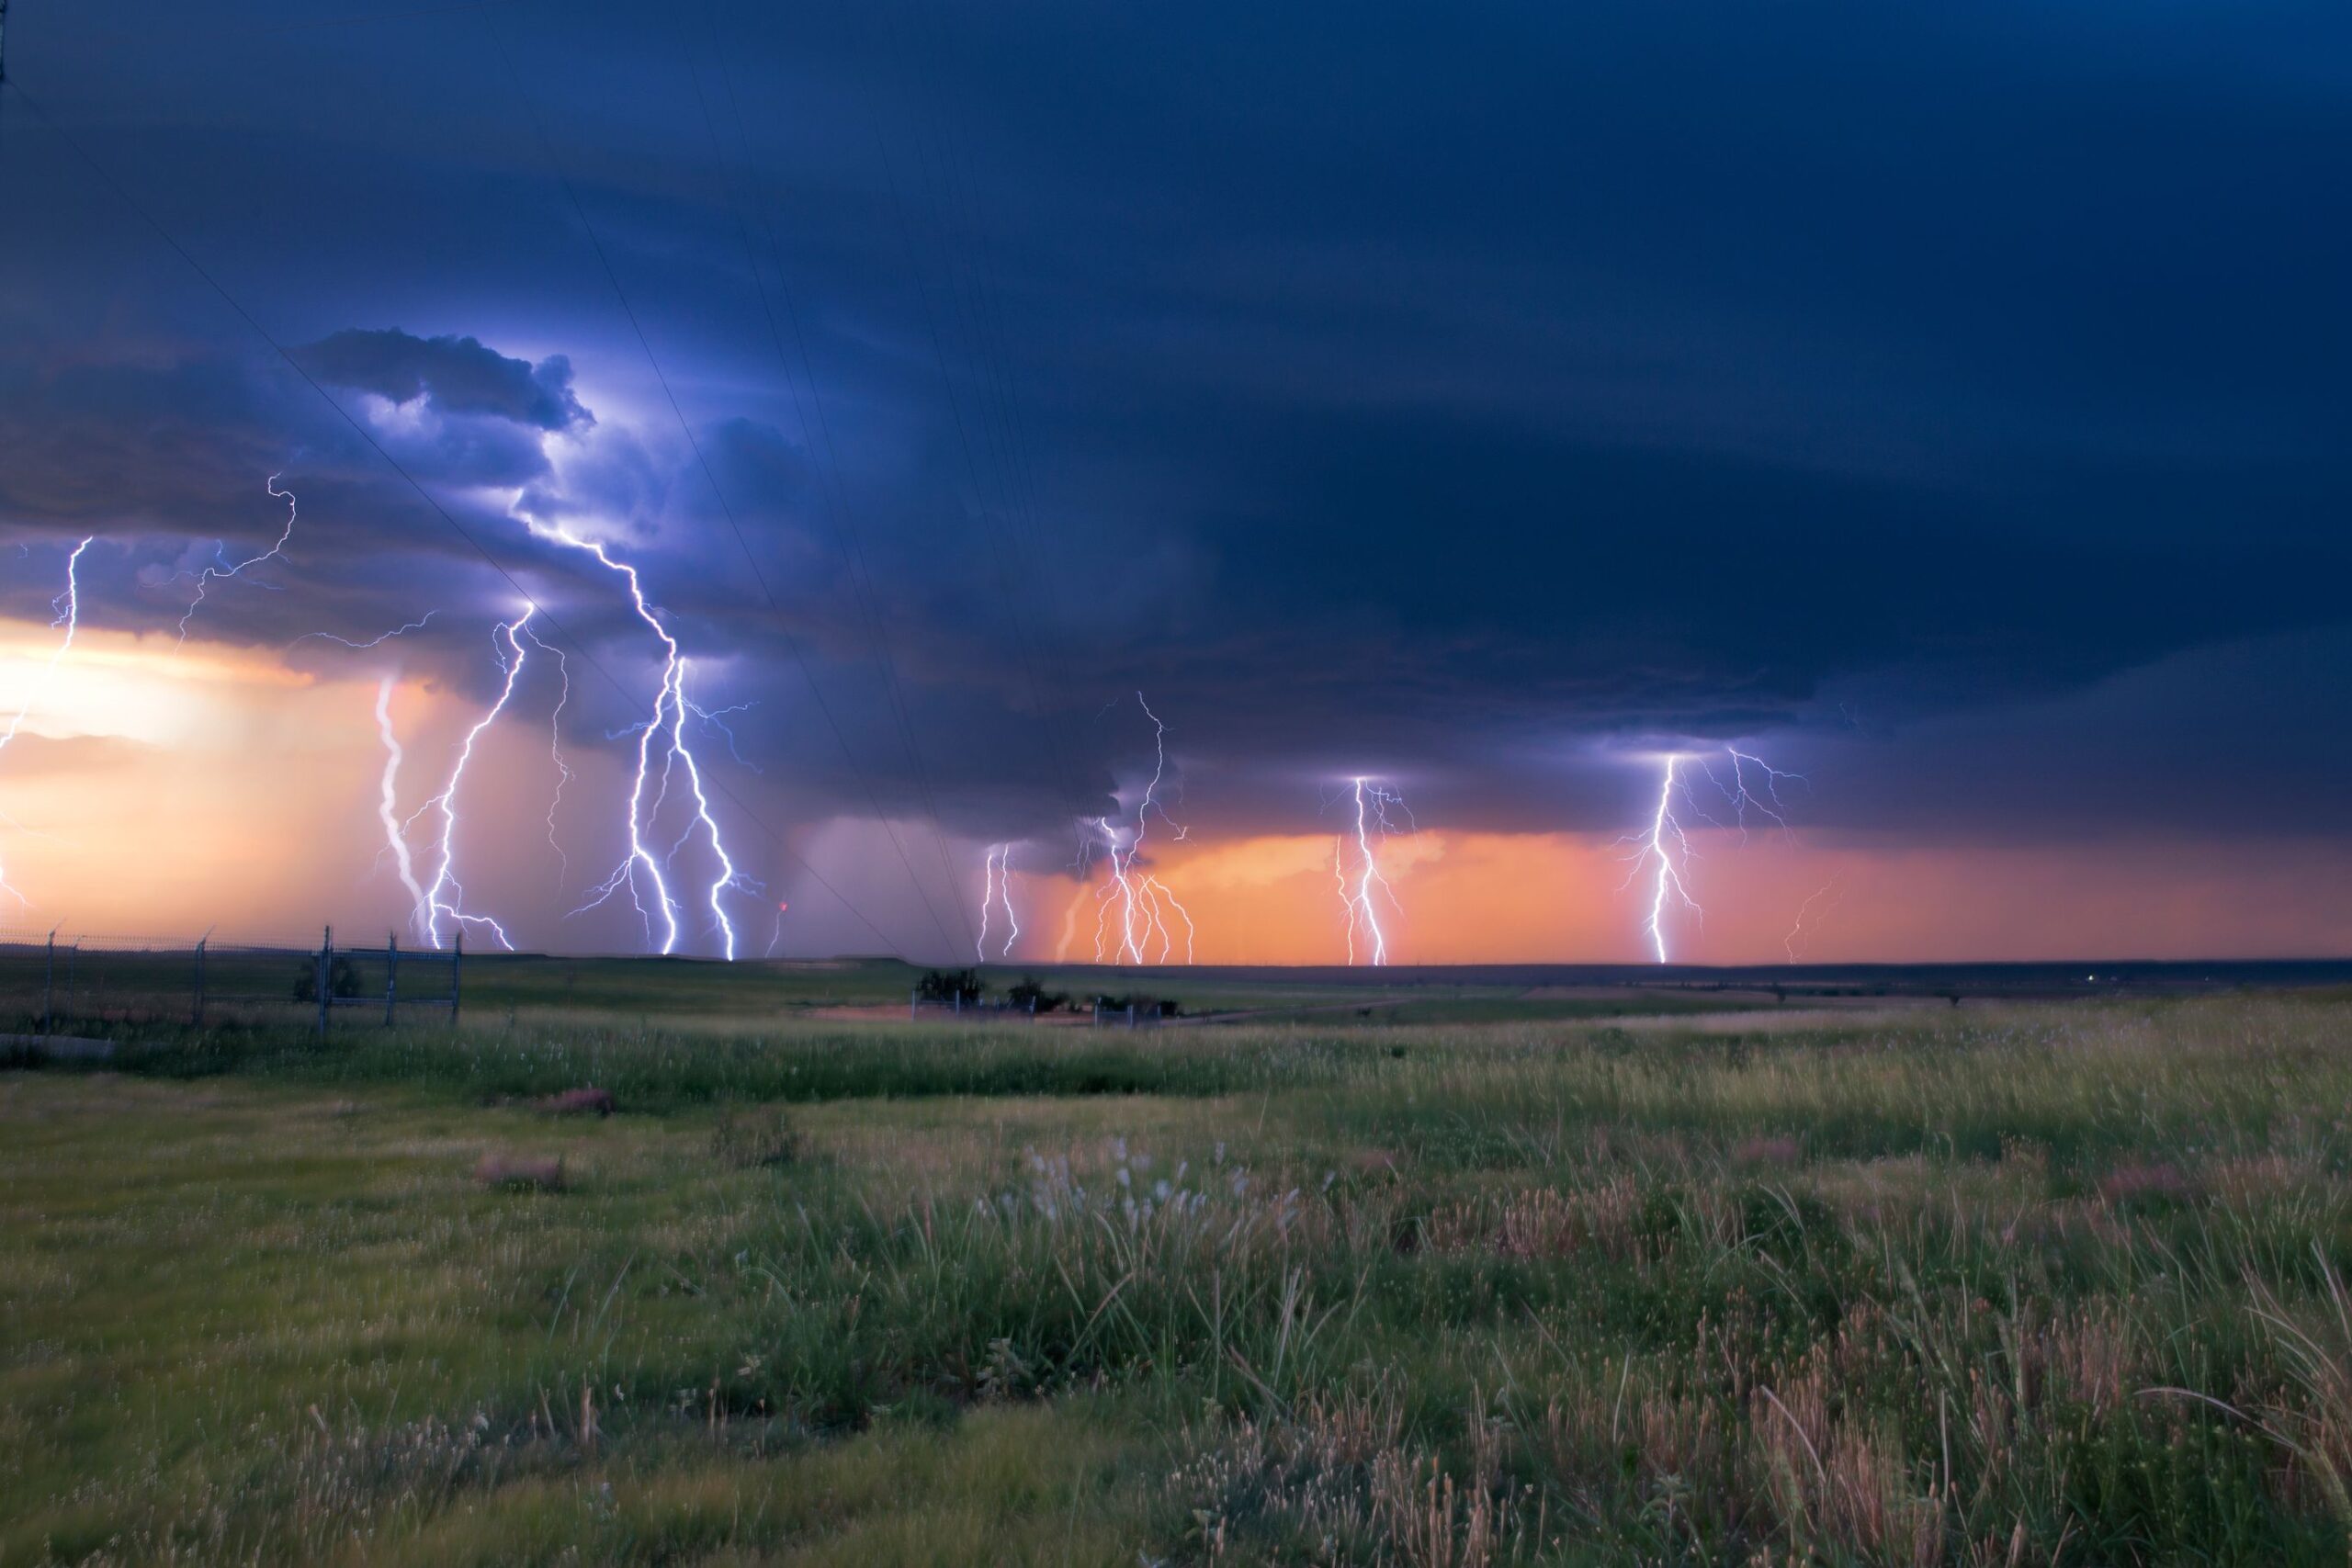 A photography timelapse of lightning across the prairies of Clark County Kansas at sunset.